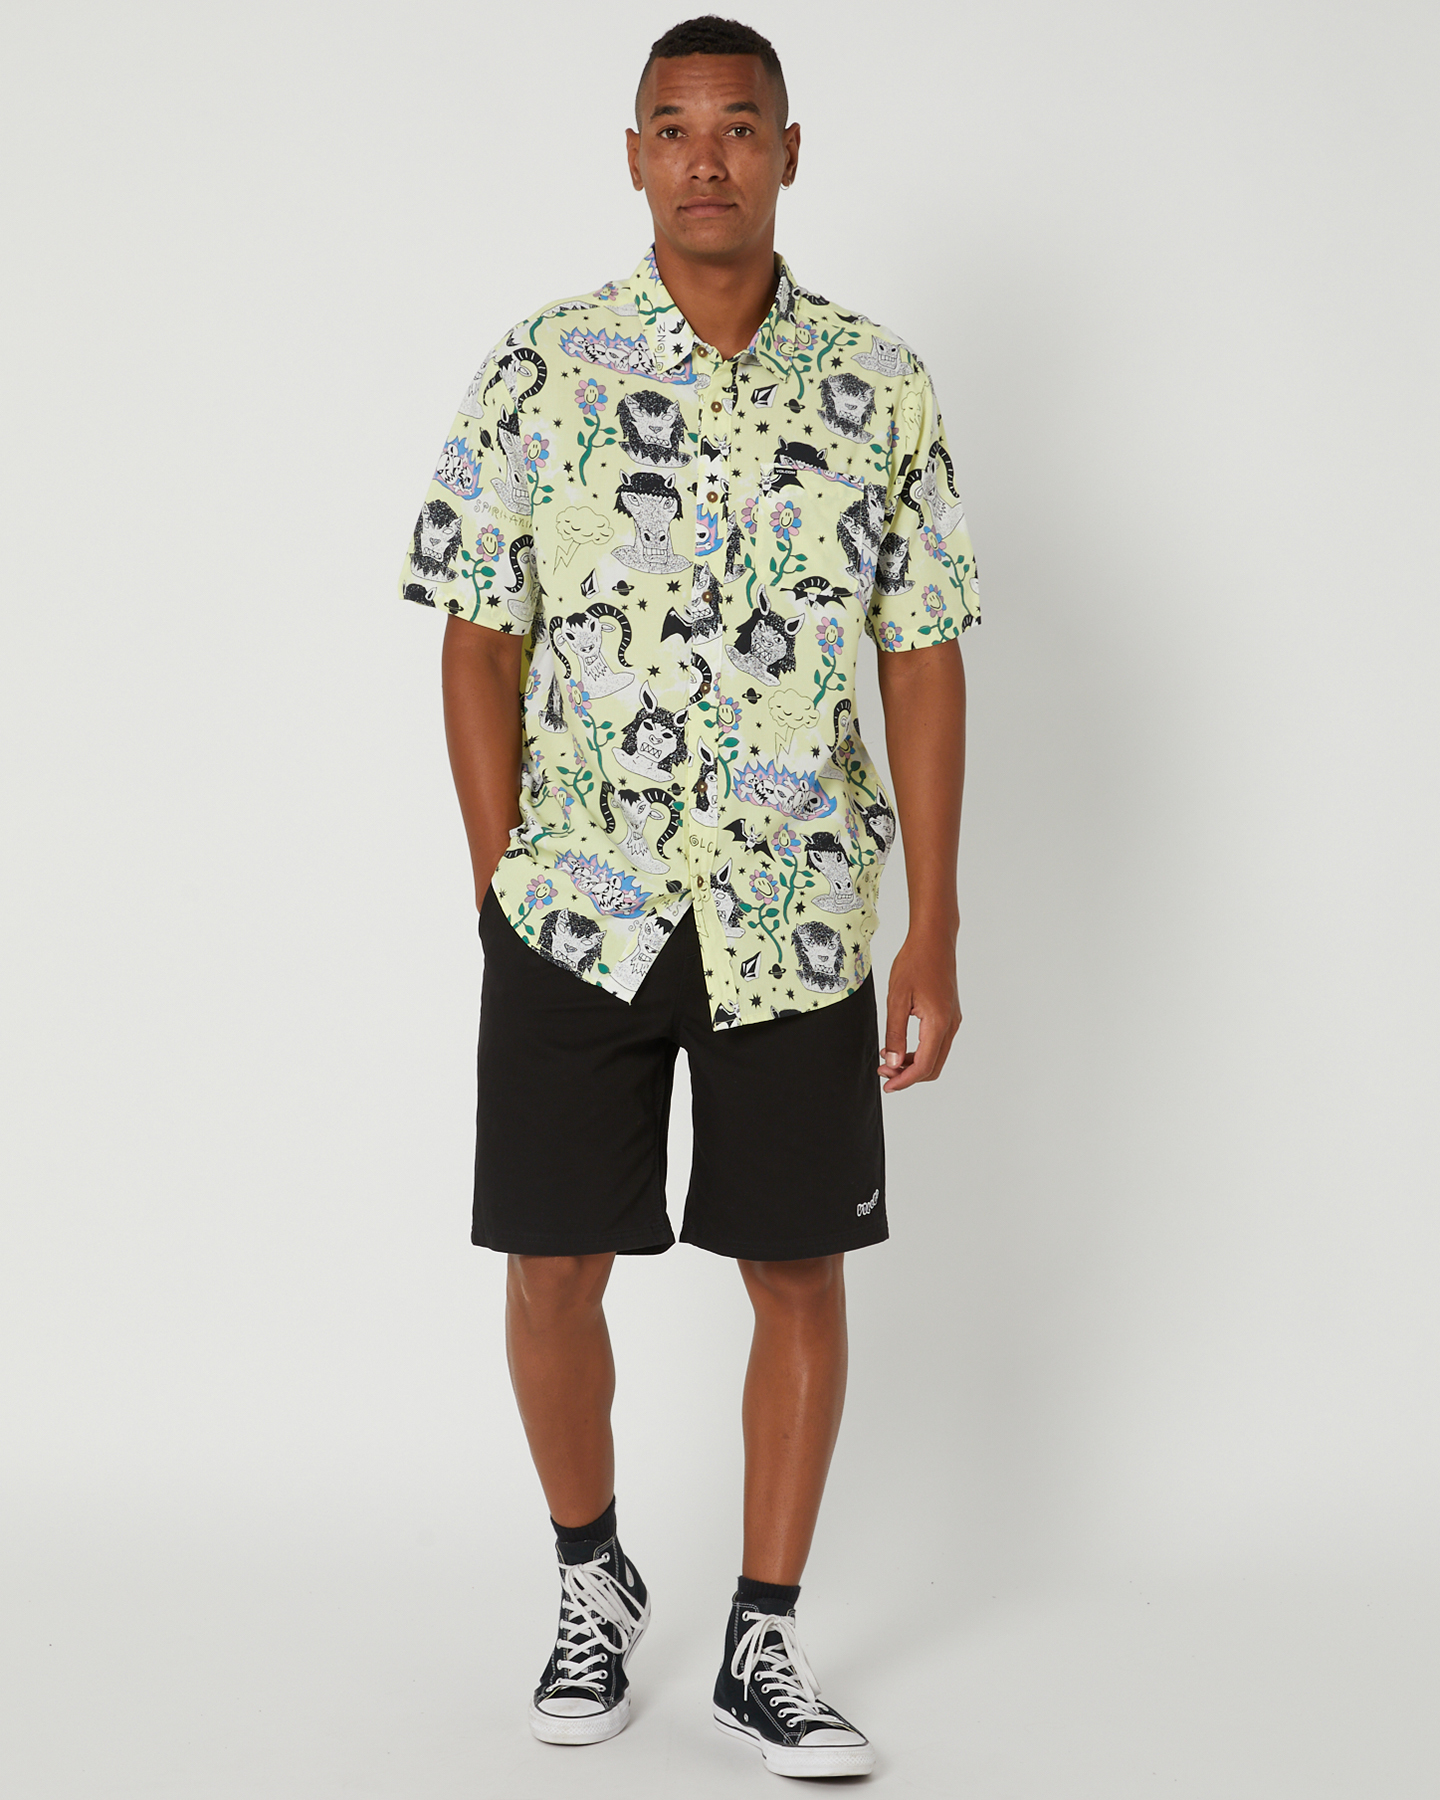 Volcom Surf Vitals Ozzy Mens Woven Ss Shirt - Glimmer Yellow | SurfStitch